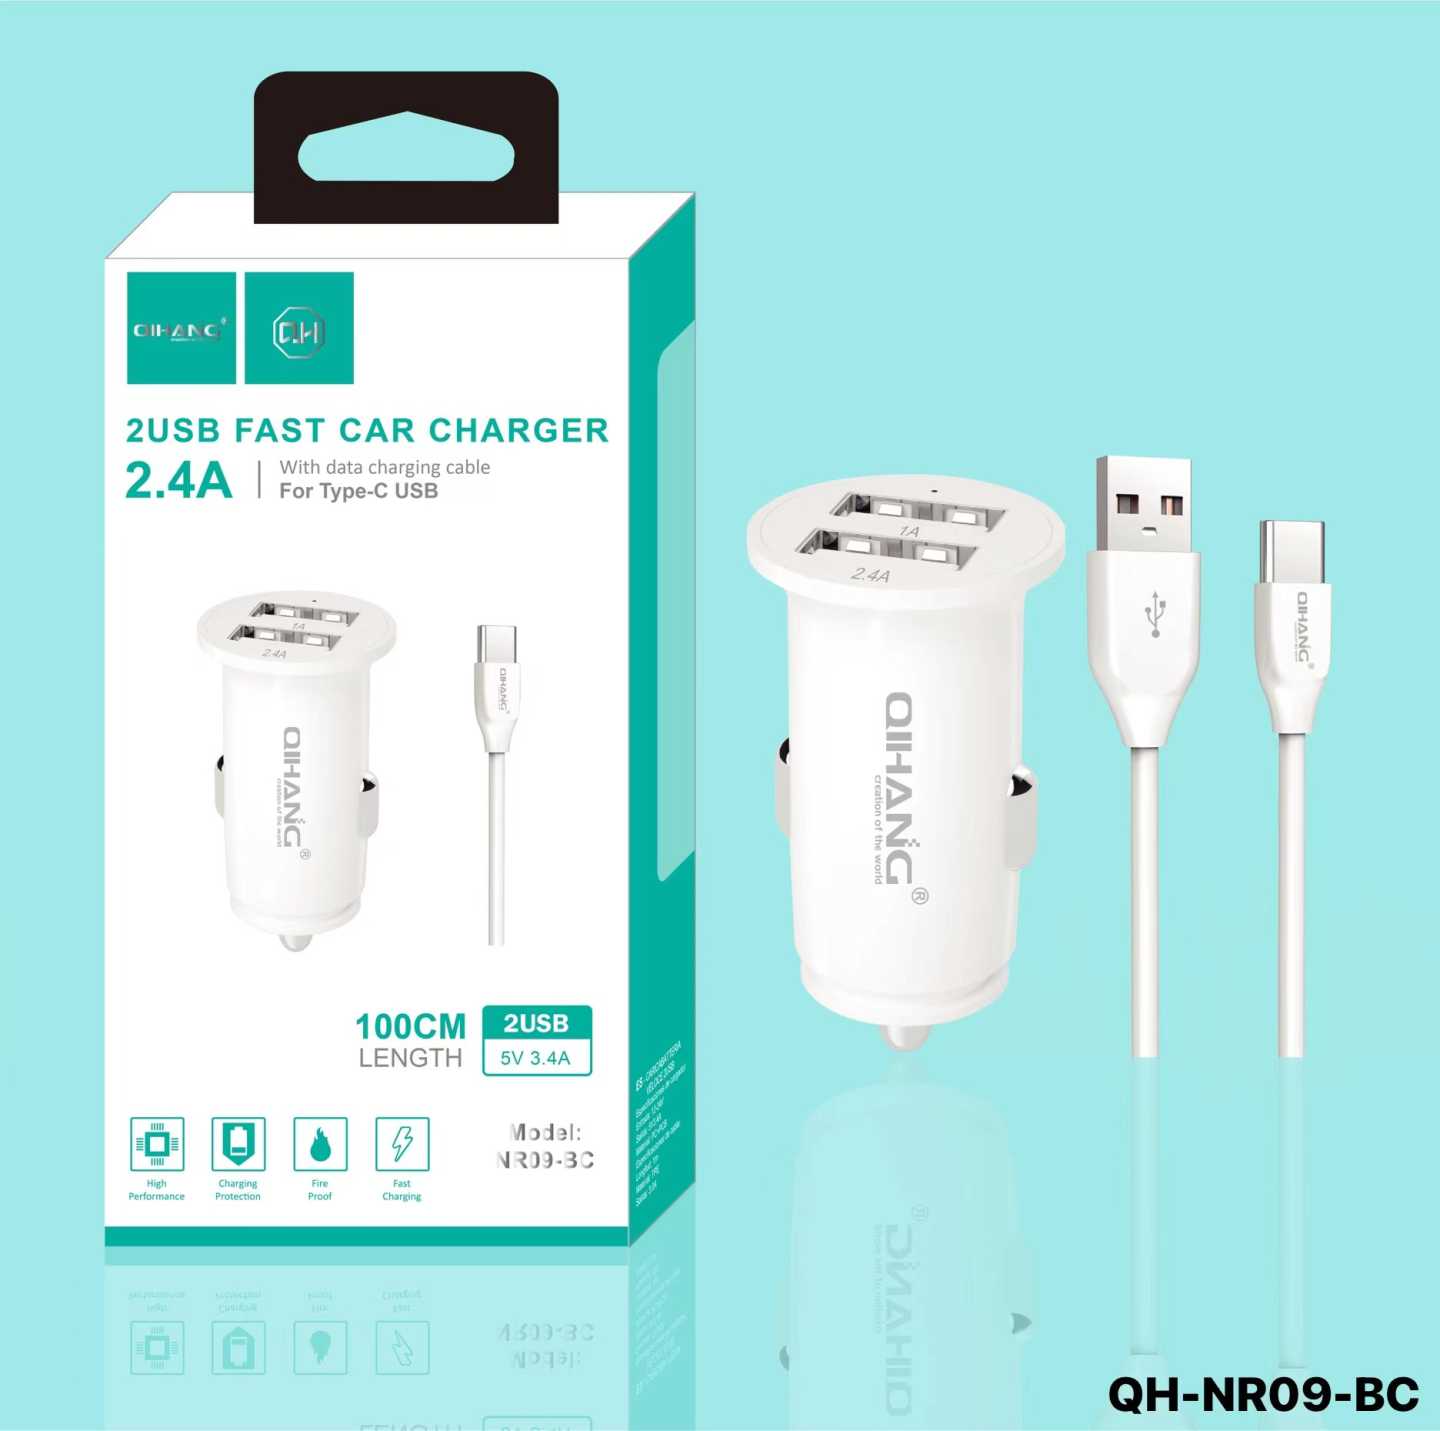 Car charger - Type C - QH-NR09-BC - Fast Charger - 212400